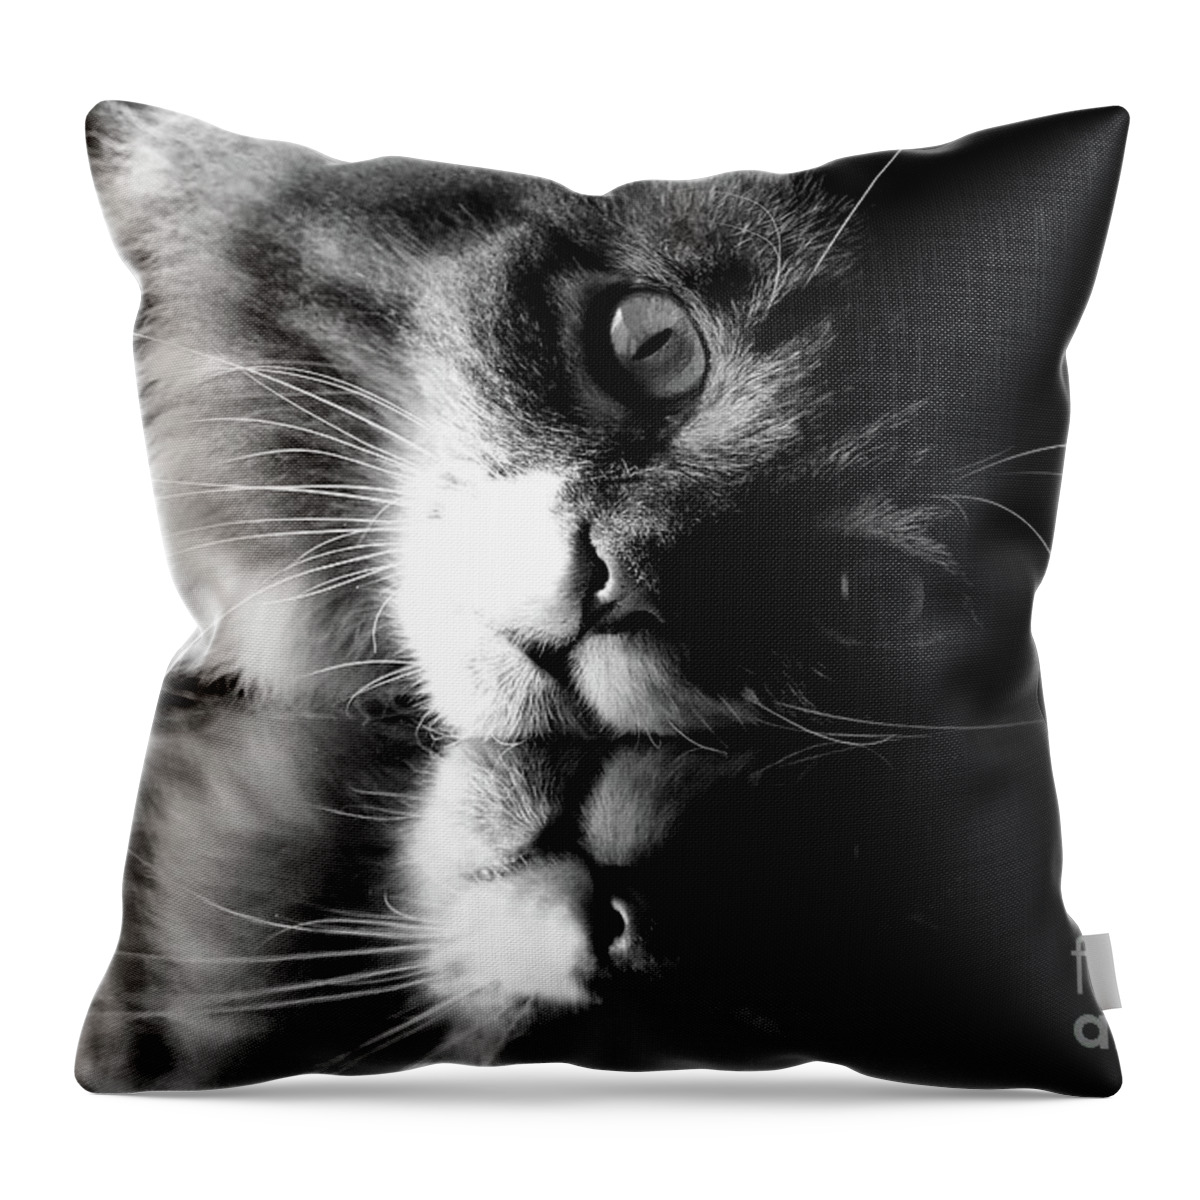 Animal Throw Pillow featuring the photograph Reflective by Susan Herber